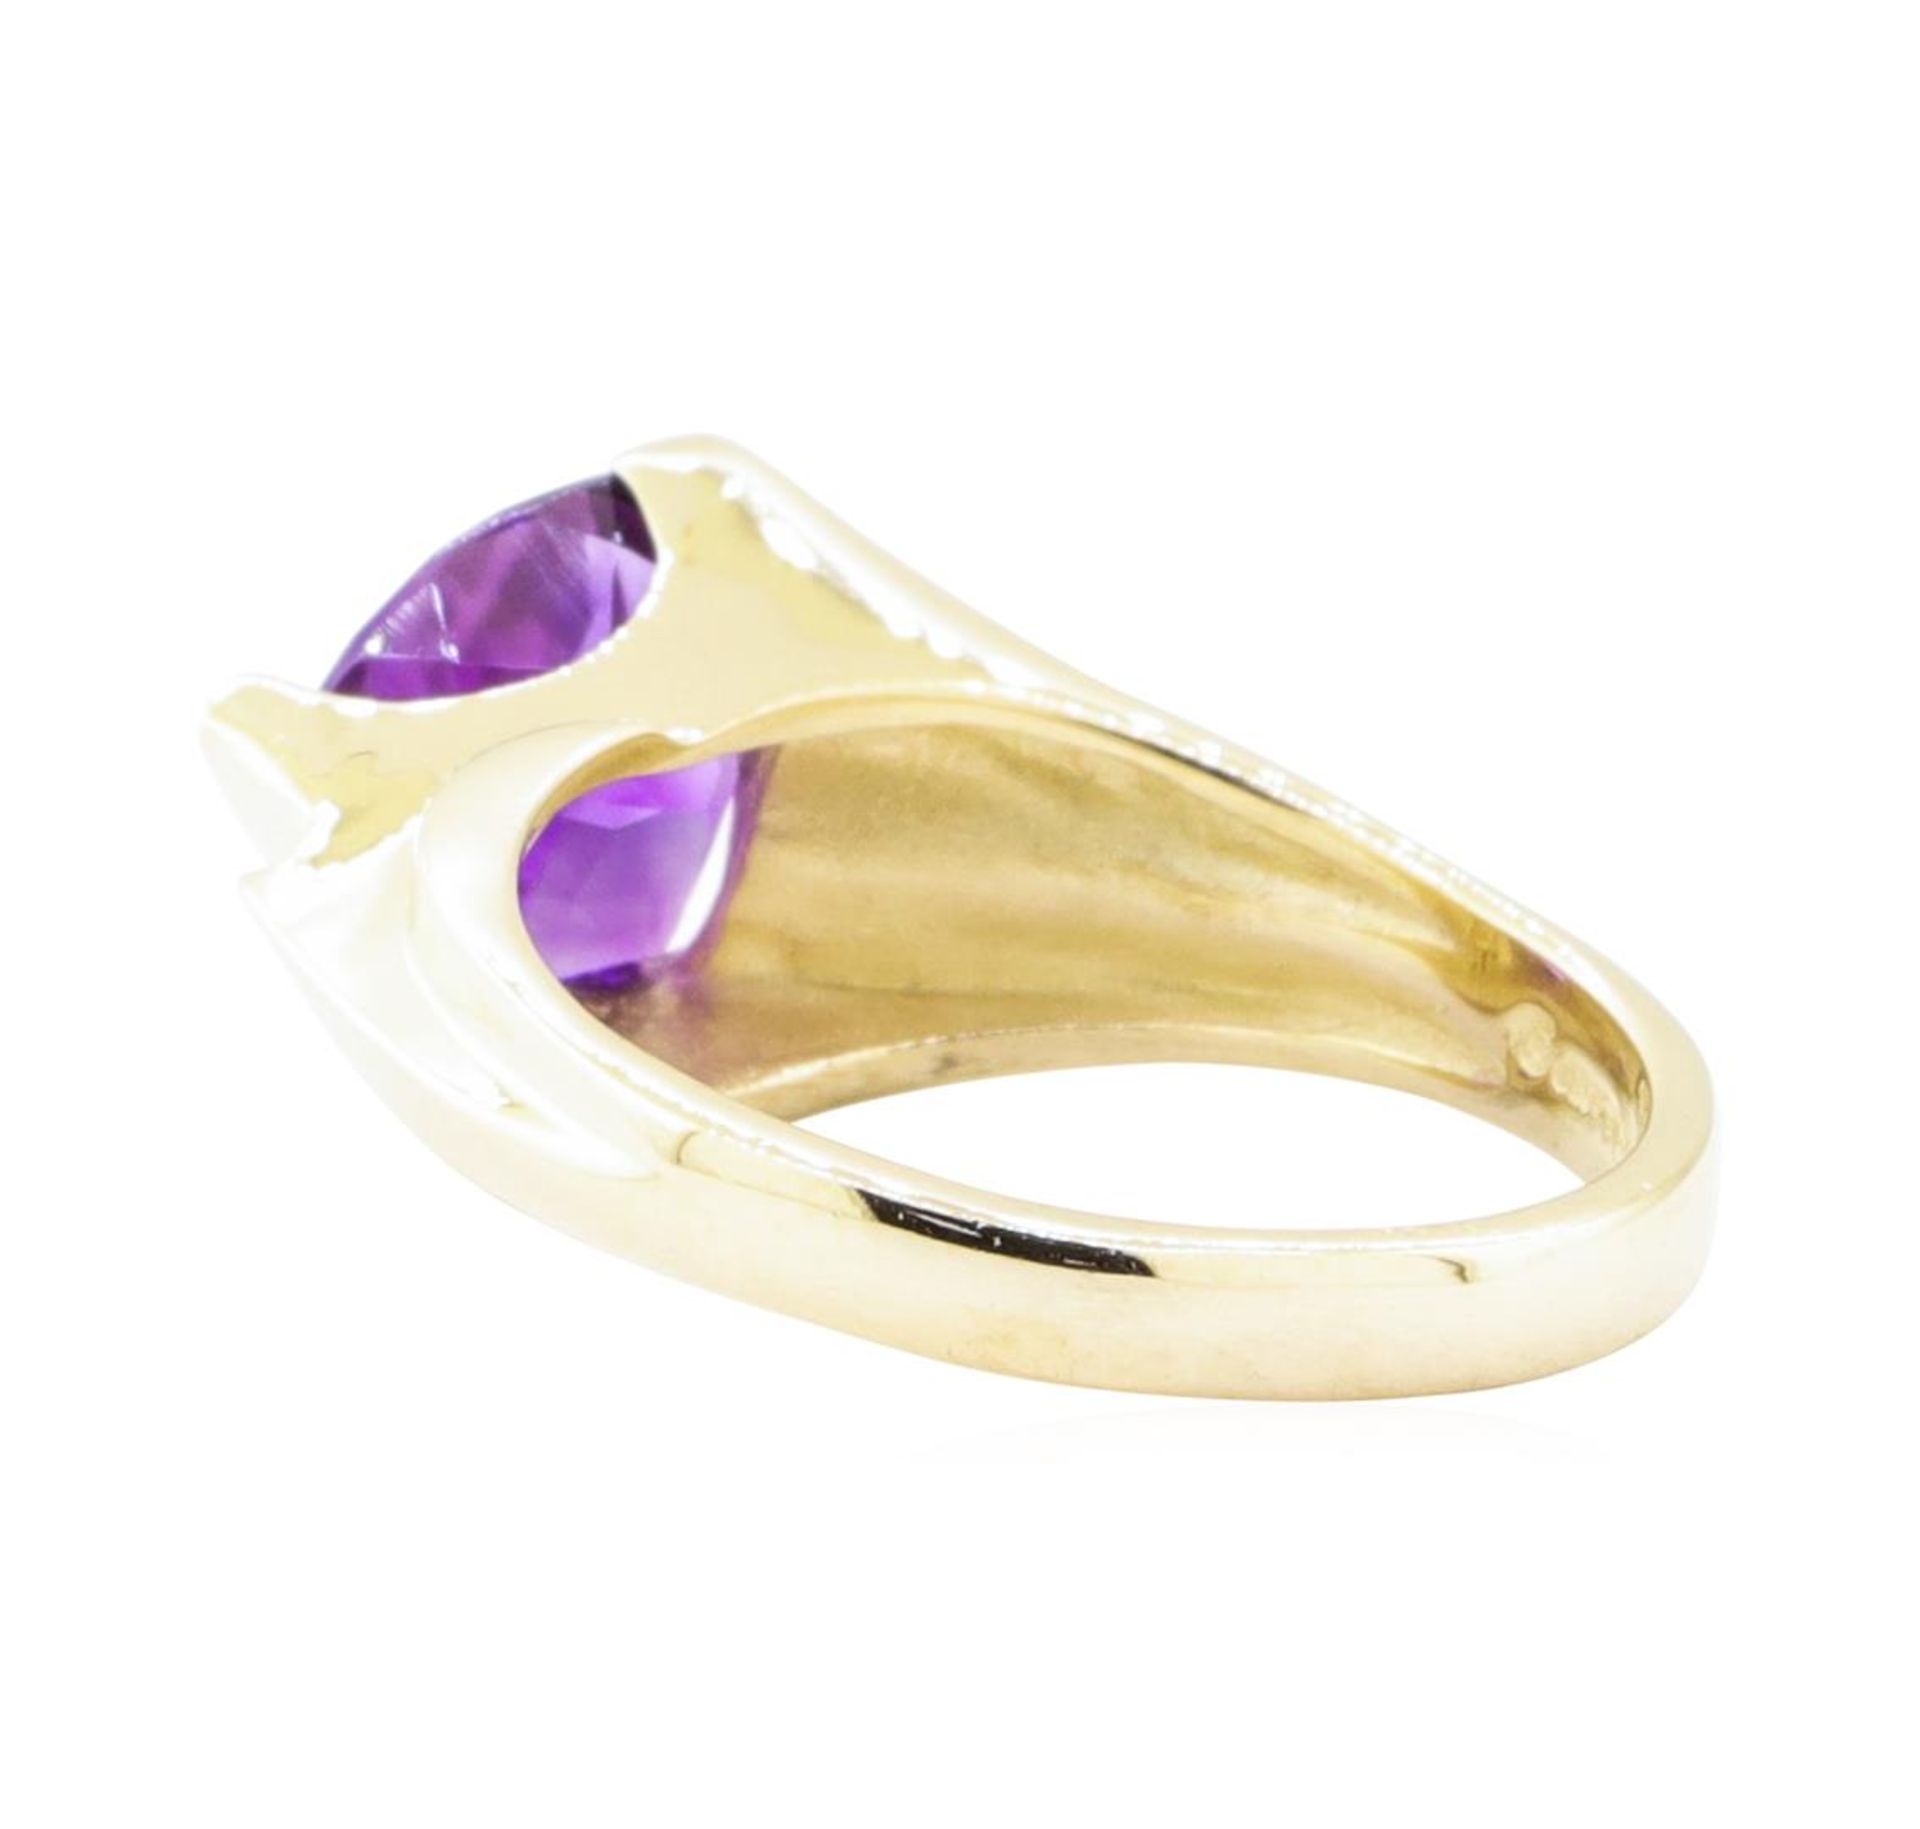 1.70 ctw Amethyst and Diamond Ring - 14KT Yellow Gold - Image 3 of 4